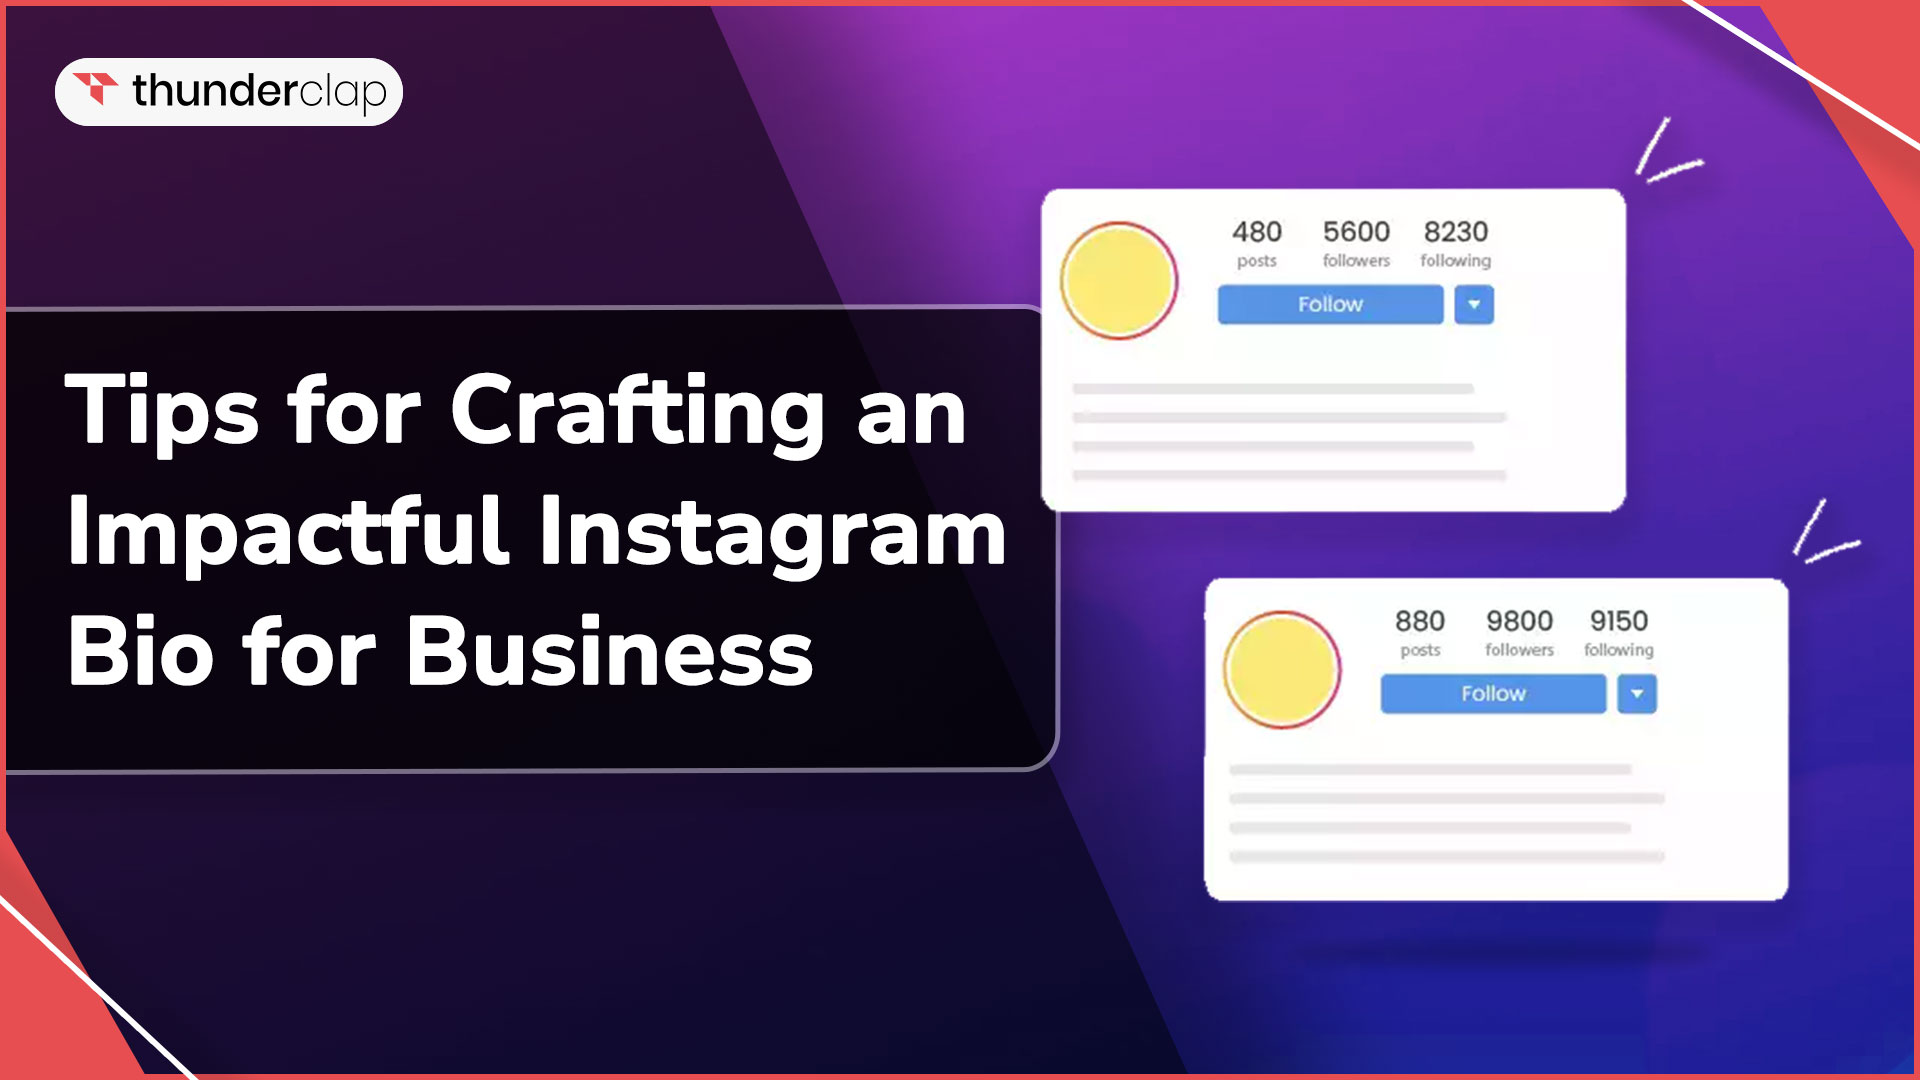 Tips for Crafting an Impactful Instagram Bio for Business